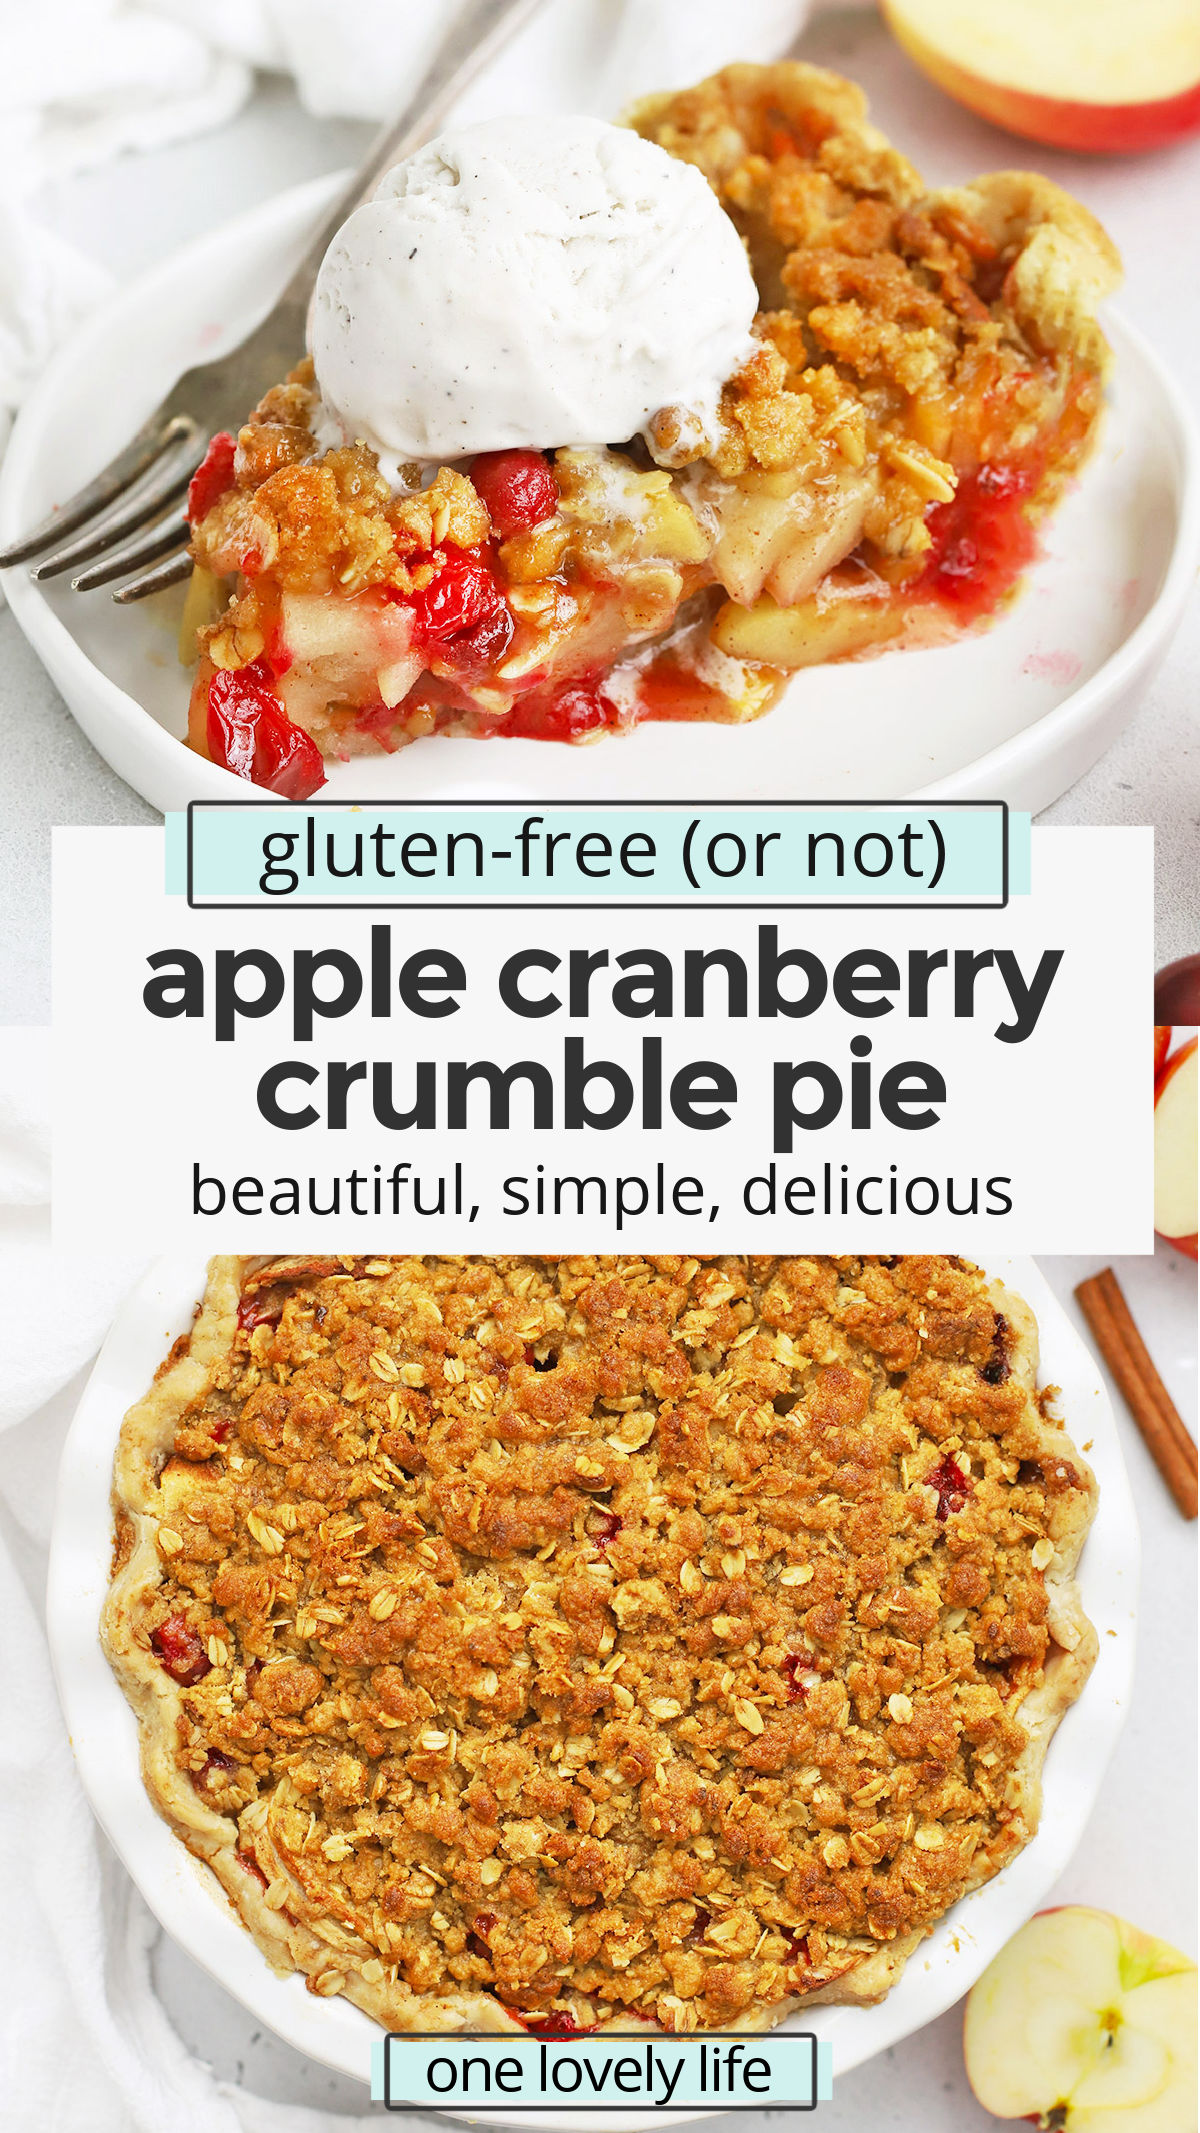 Apple Cranberry Crumble Pie - This Apple Cranberry Pie with crumble topping is what dreams are made of. (Gluten-Free + Vegan-Friendly!) // Cranberry Apple Pie // Fall Pie // Thanksgiving pie // Gluten-free pie // vegan pie #applepie #thanksgiving #pie #applepie